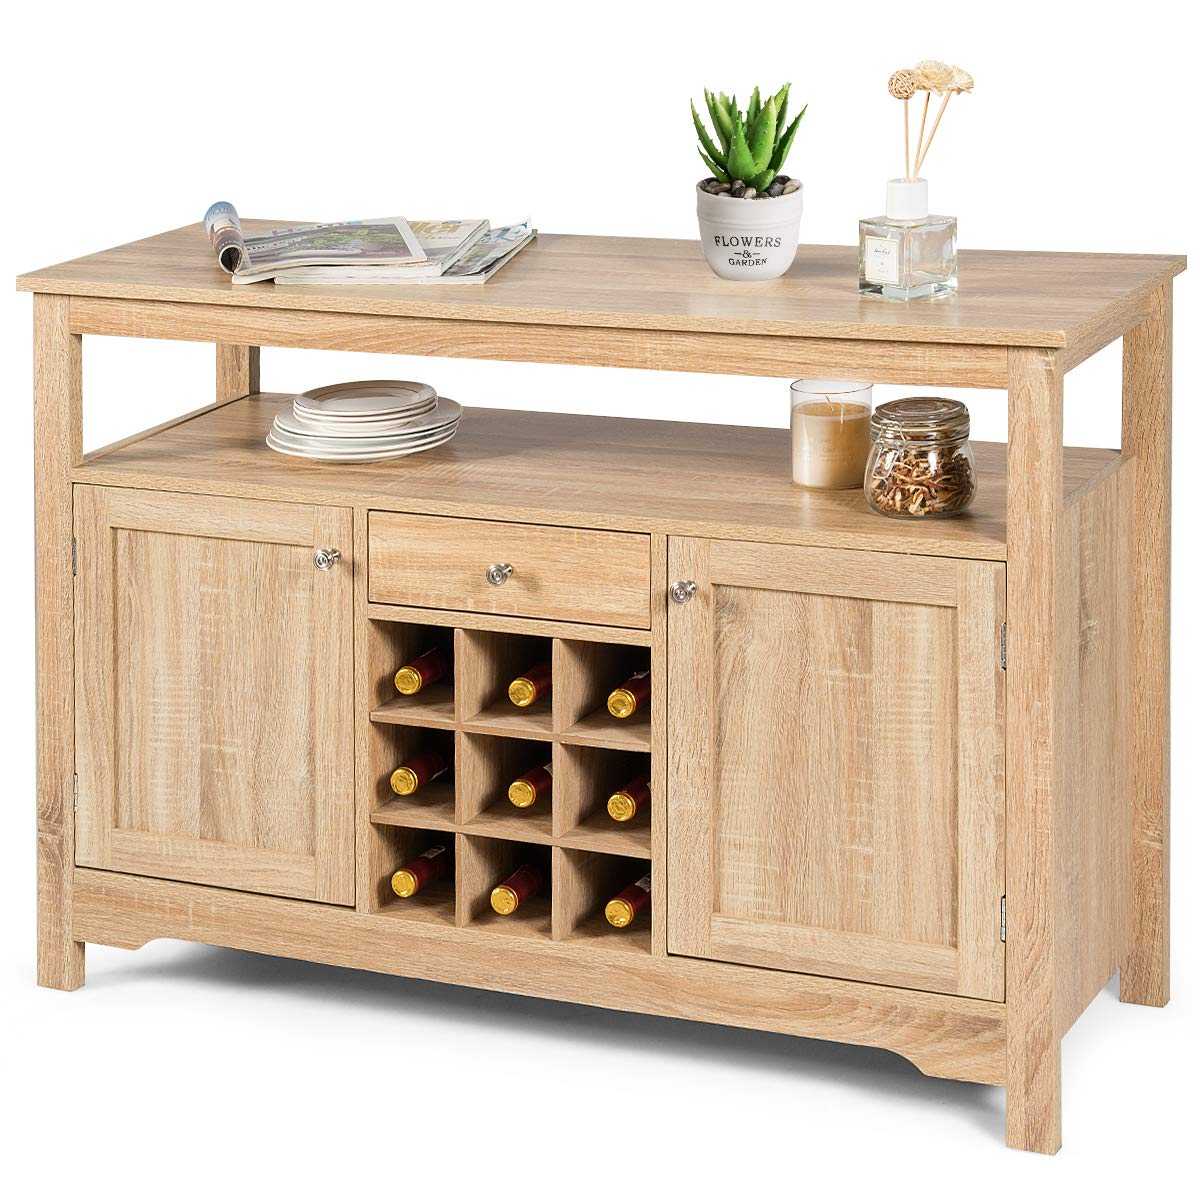 Giantex Buffet Server Sideboard, Console Table, Wood Dining Table